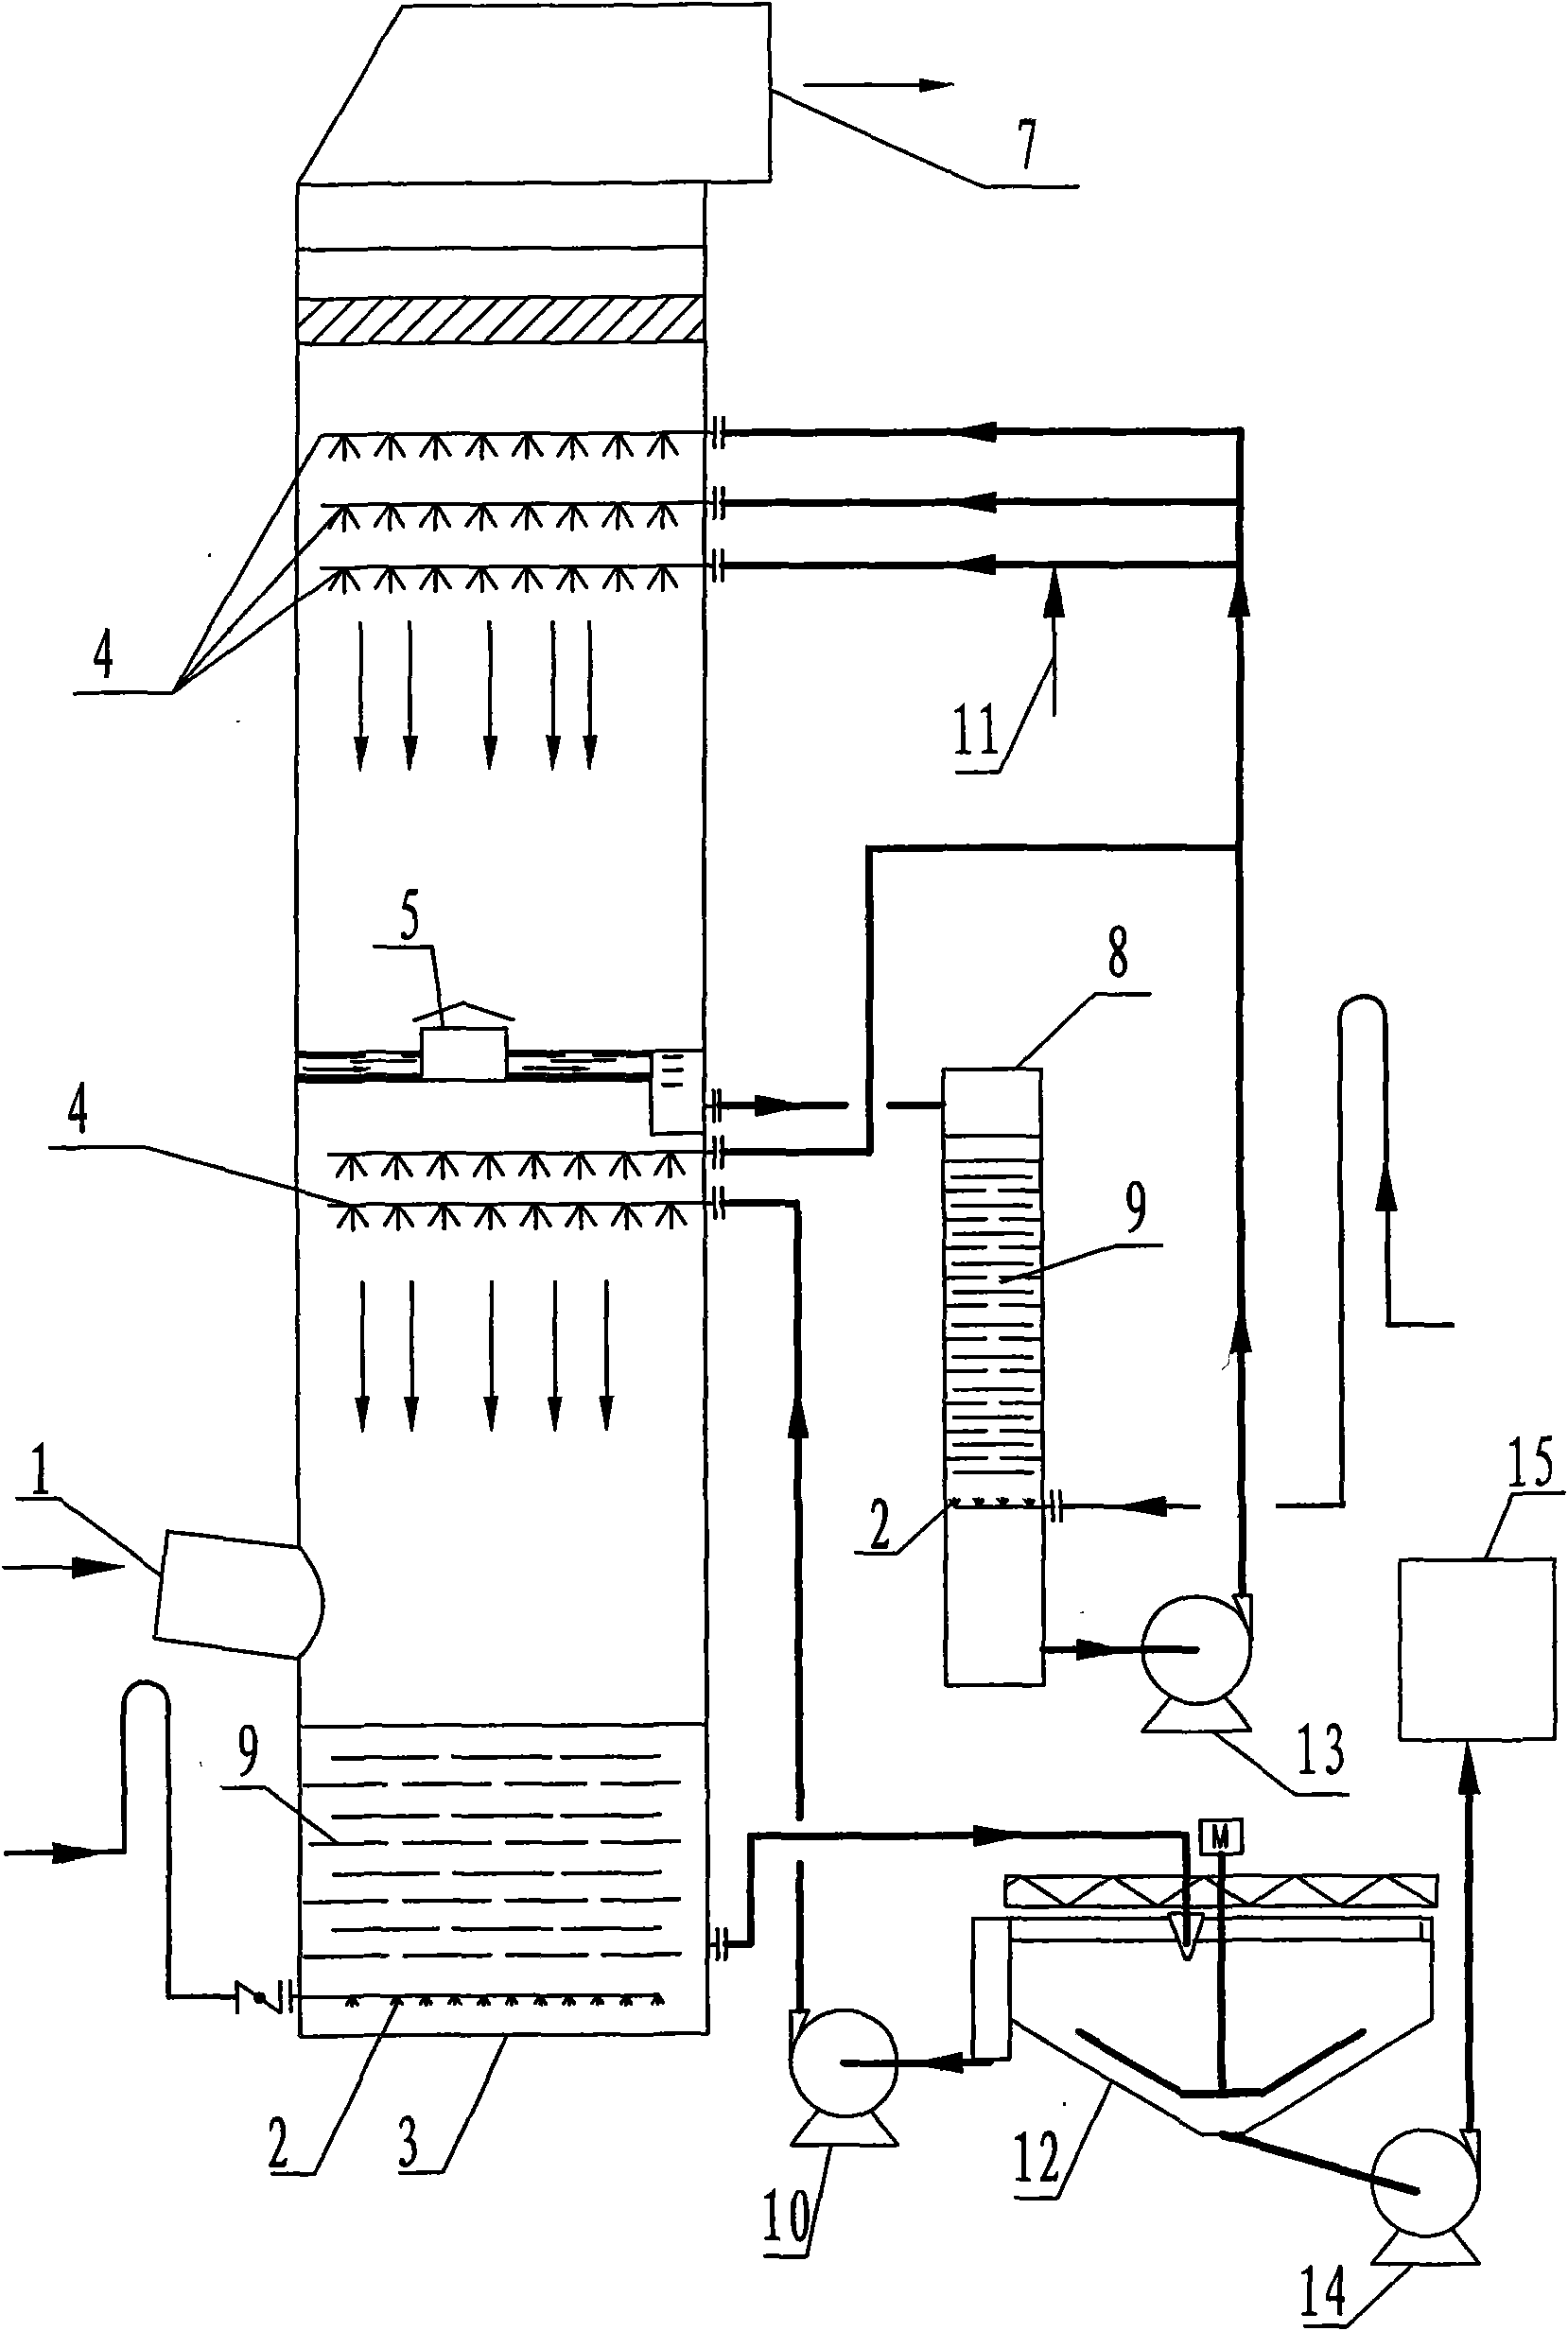 Ammonia desulfurization technology and device utilizing high potential energy